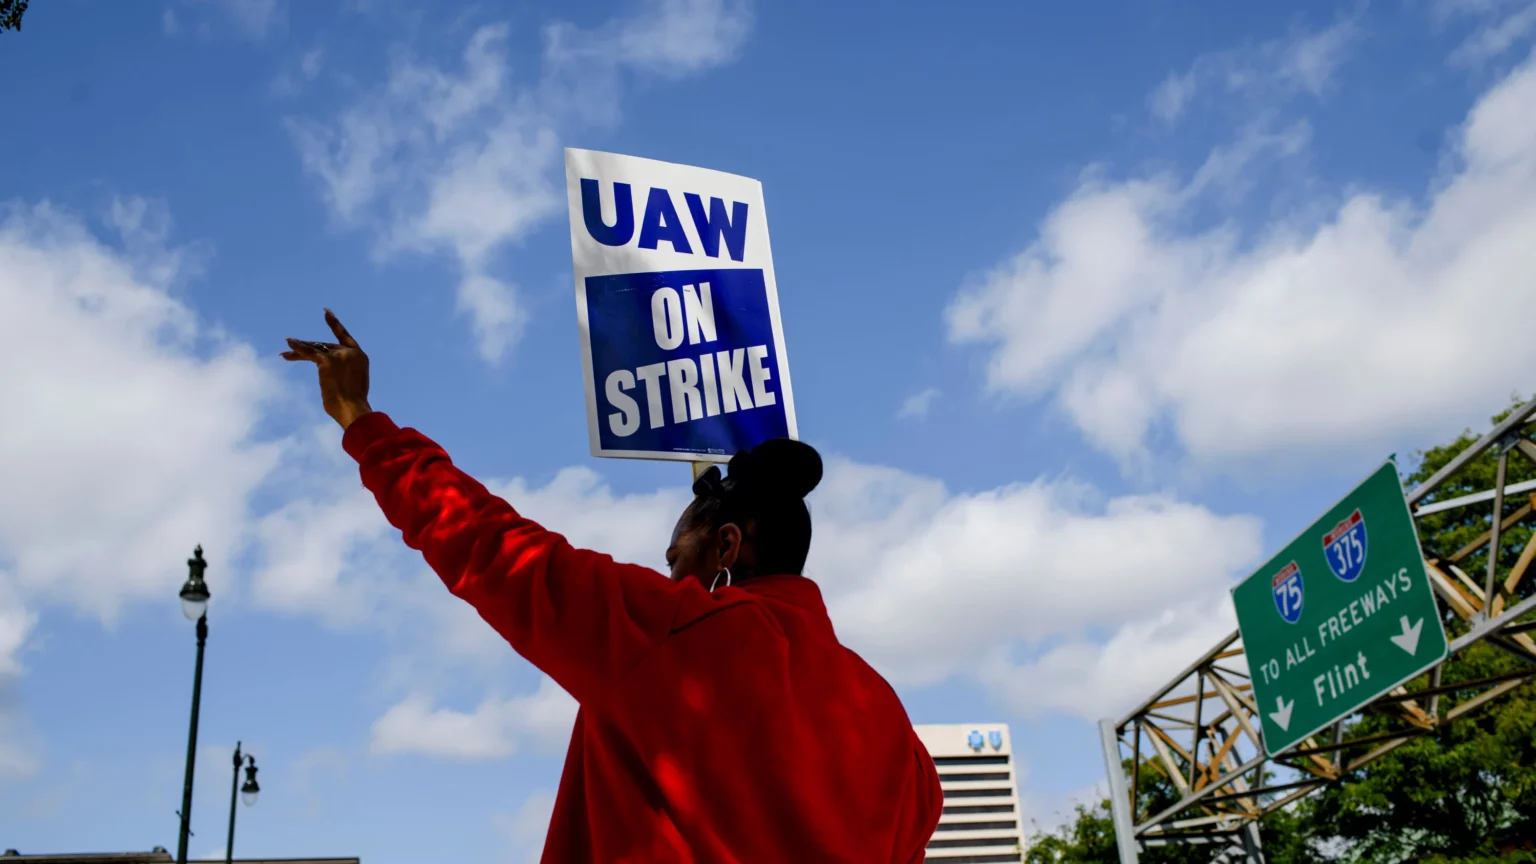 4000-more-autoworkers-will-join-other-uaw-members-on-strike-union